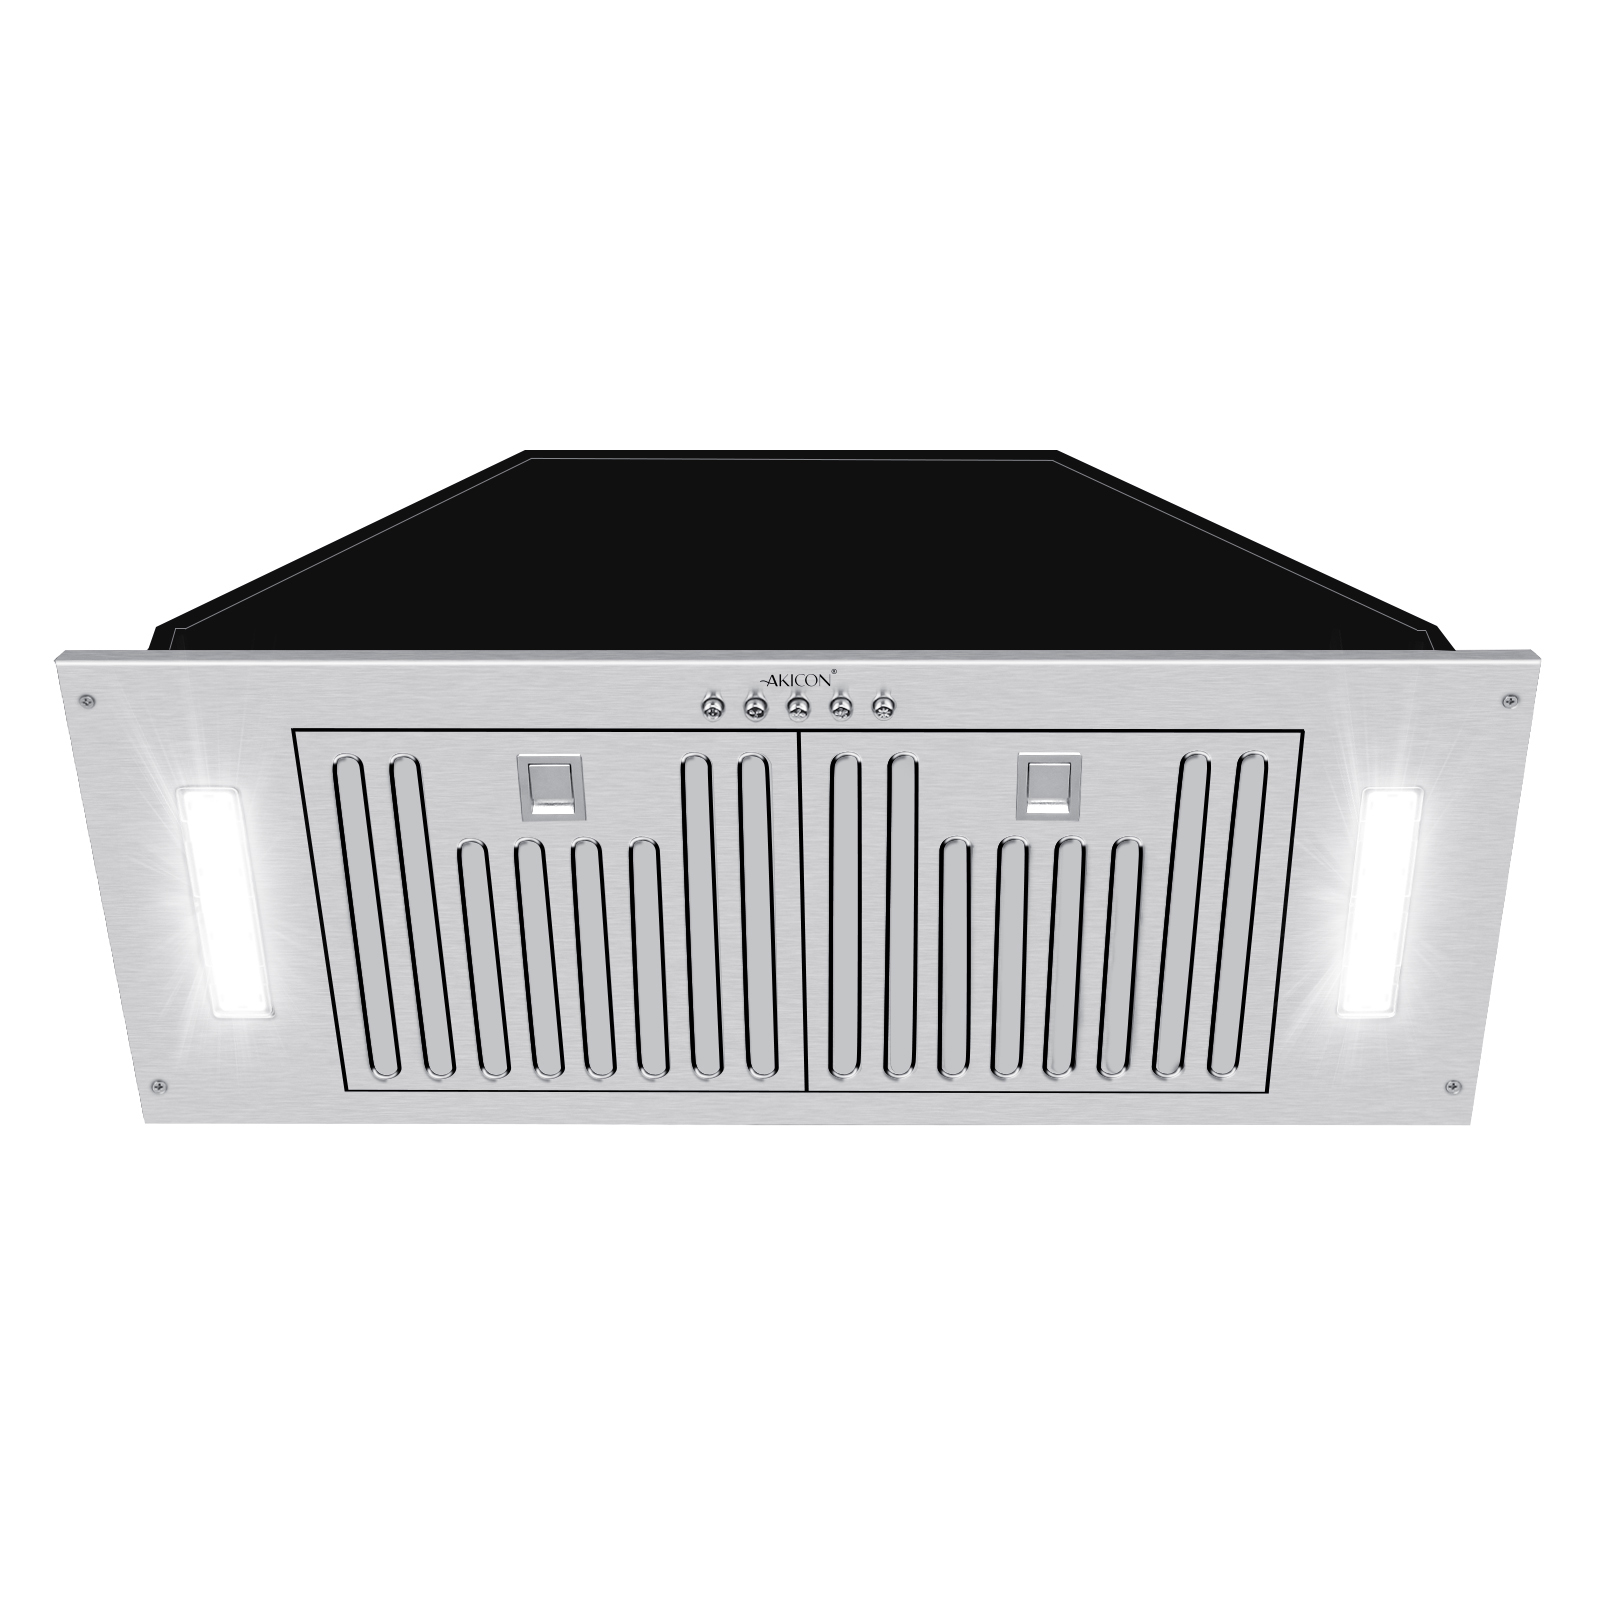 Akicon 30 in. 3-Speeds 600CFM Ducted Insert/Built-in Range Hood, Ultra Quiet in Stainless Steel with Warm White Light, Silver